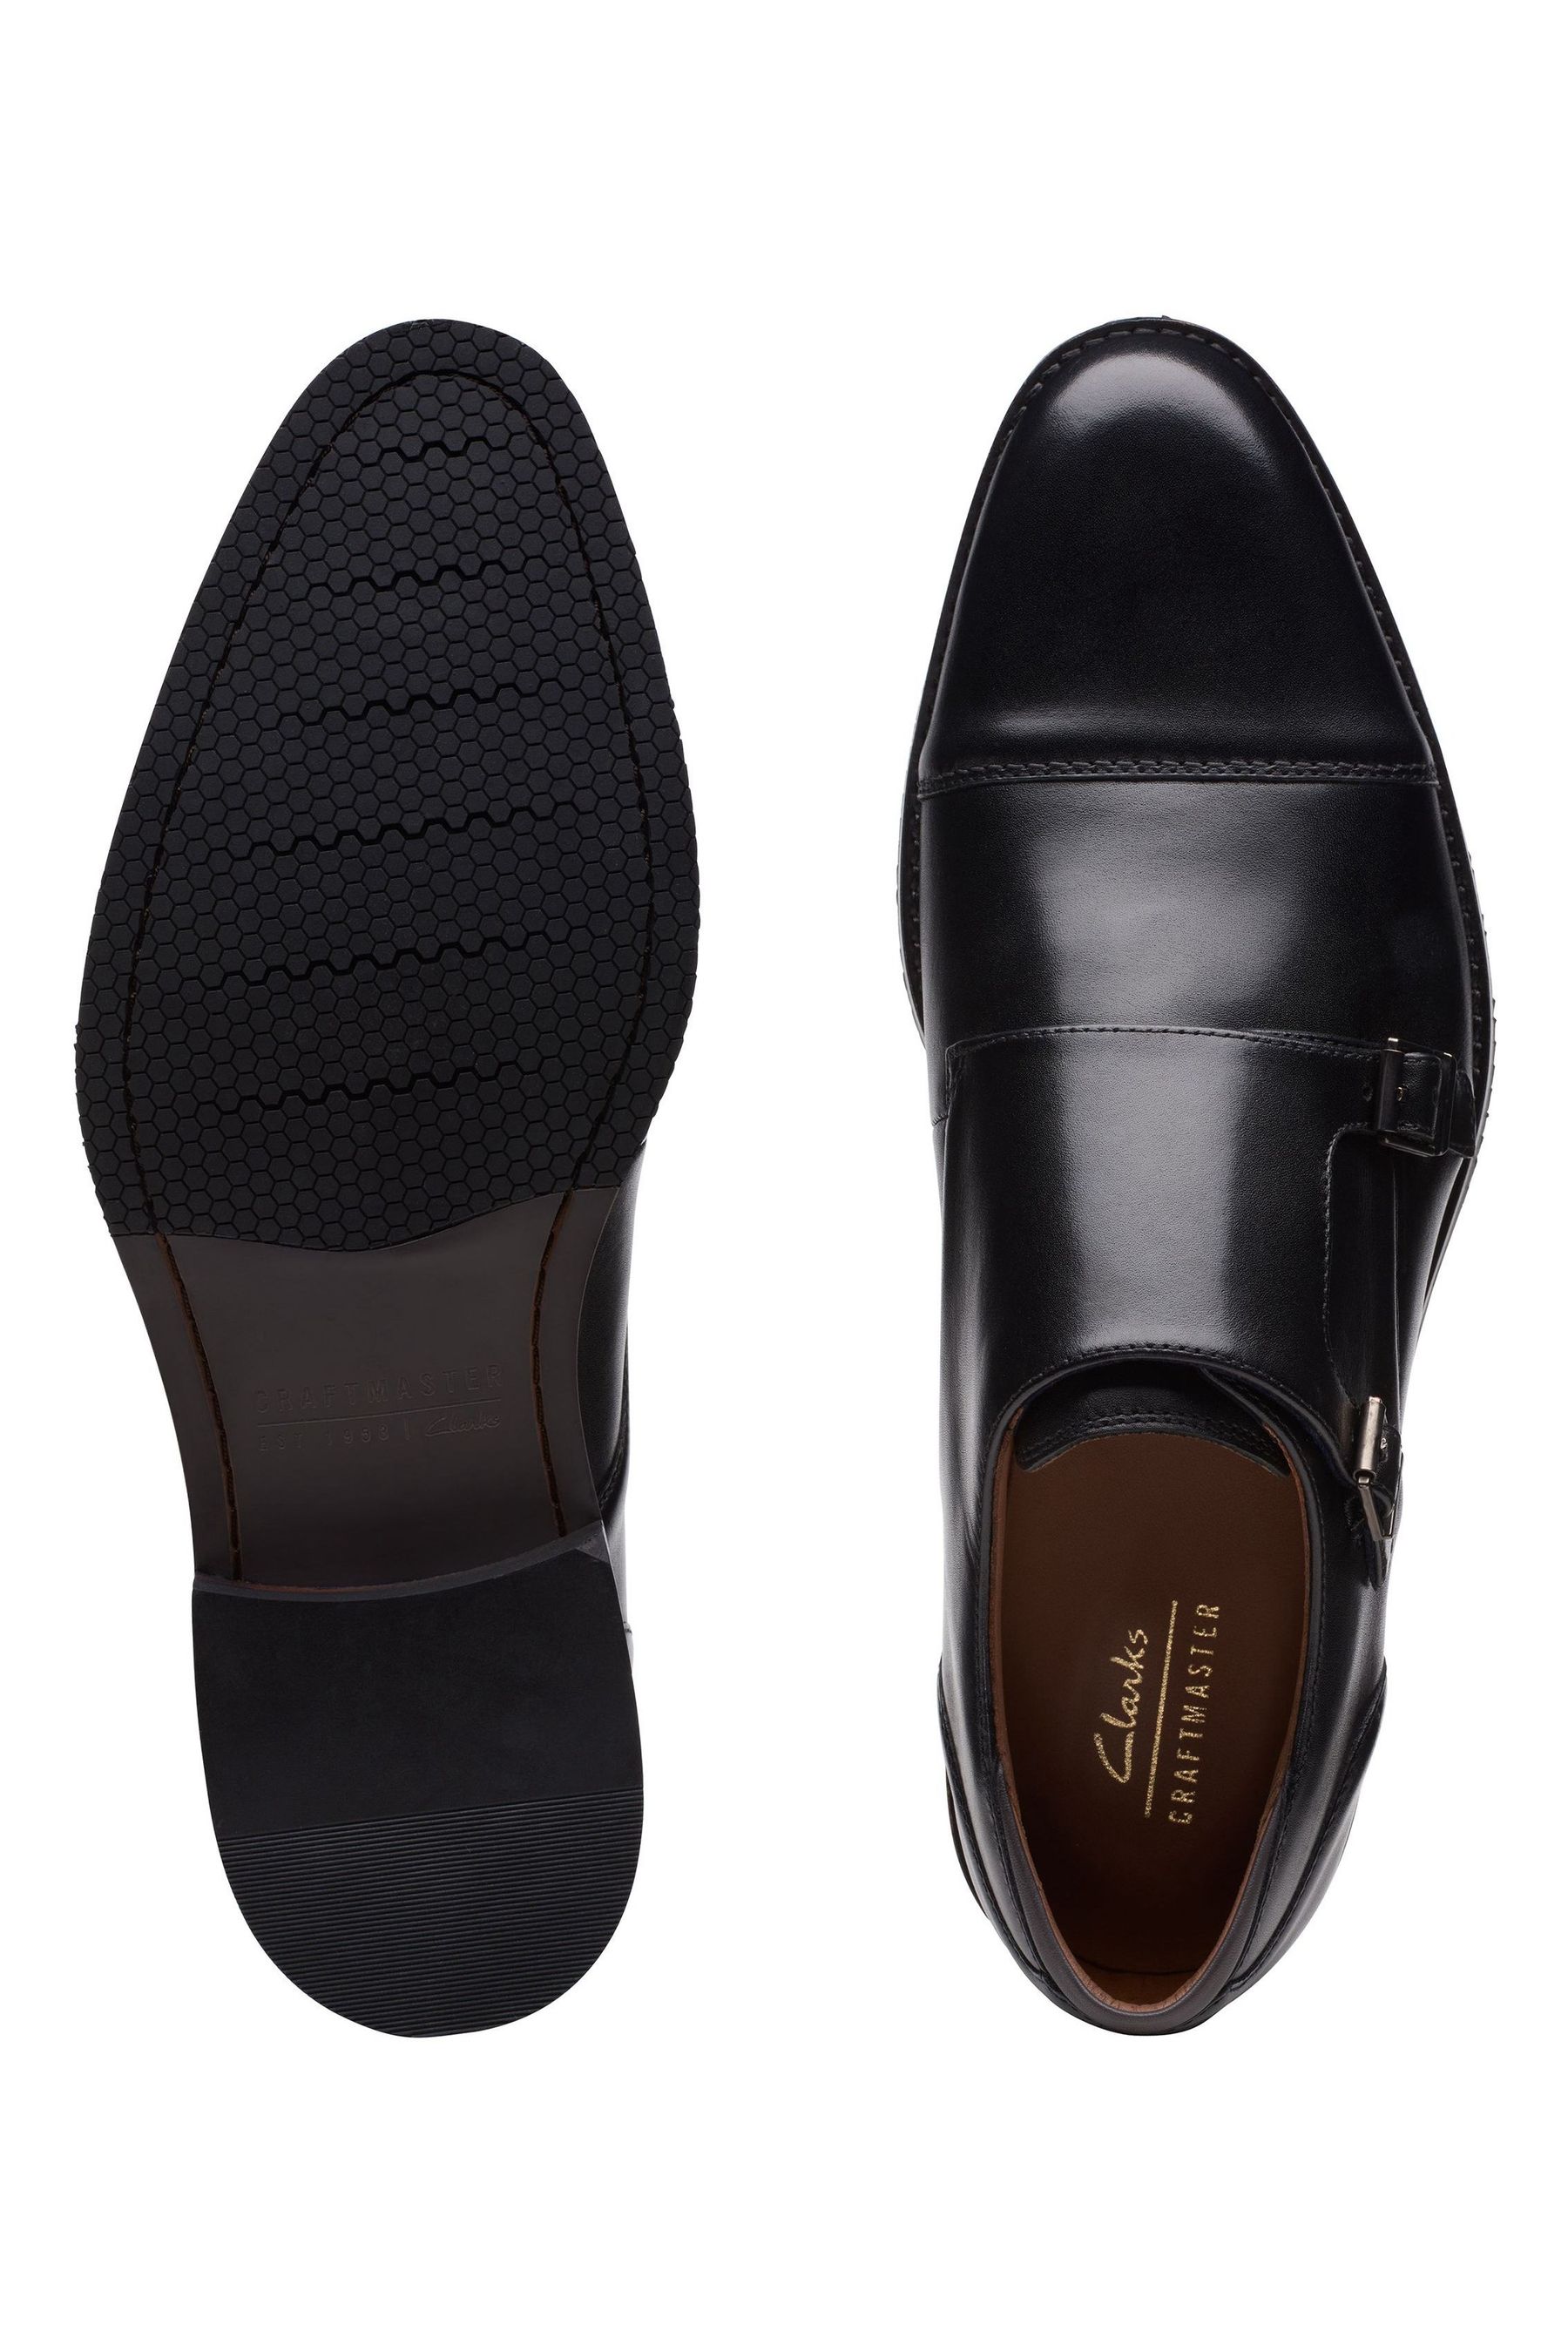 Buy Clarks Black Leather Craft Arlo Monk Shoes from the Next UK online shop